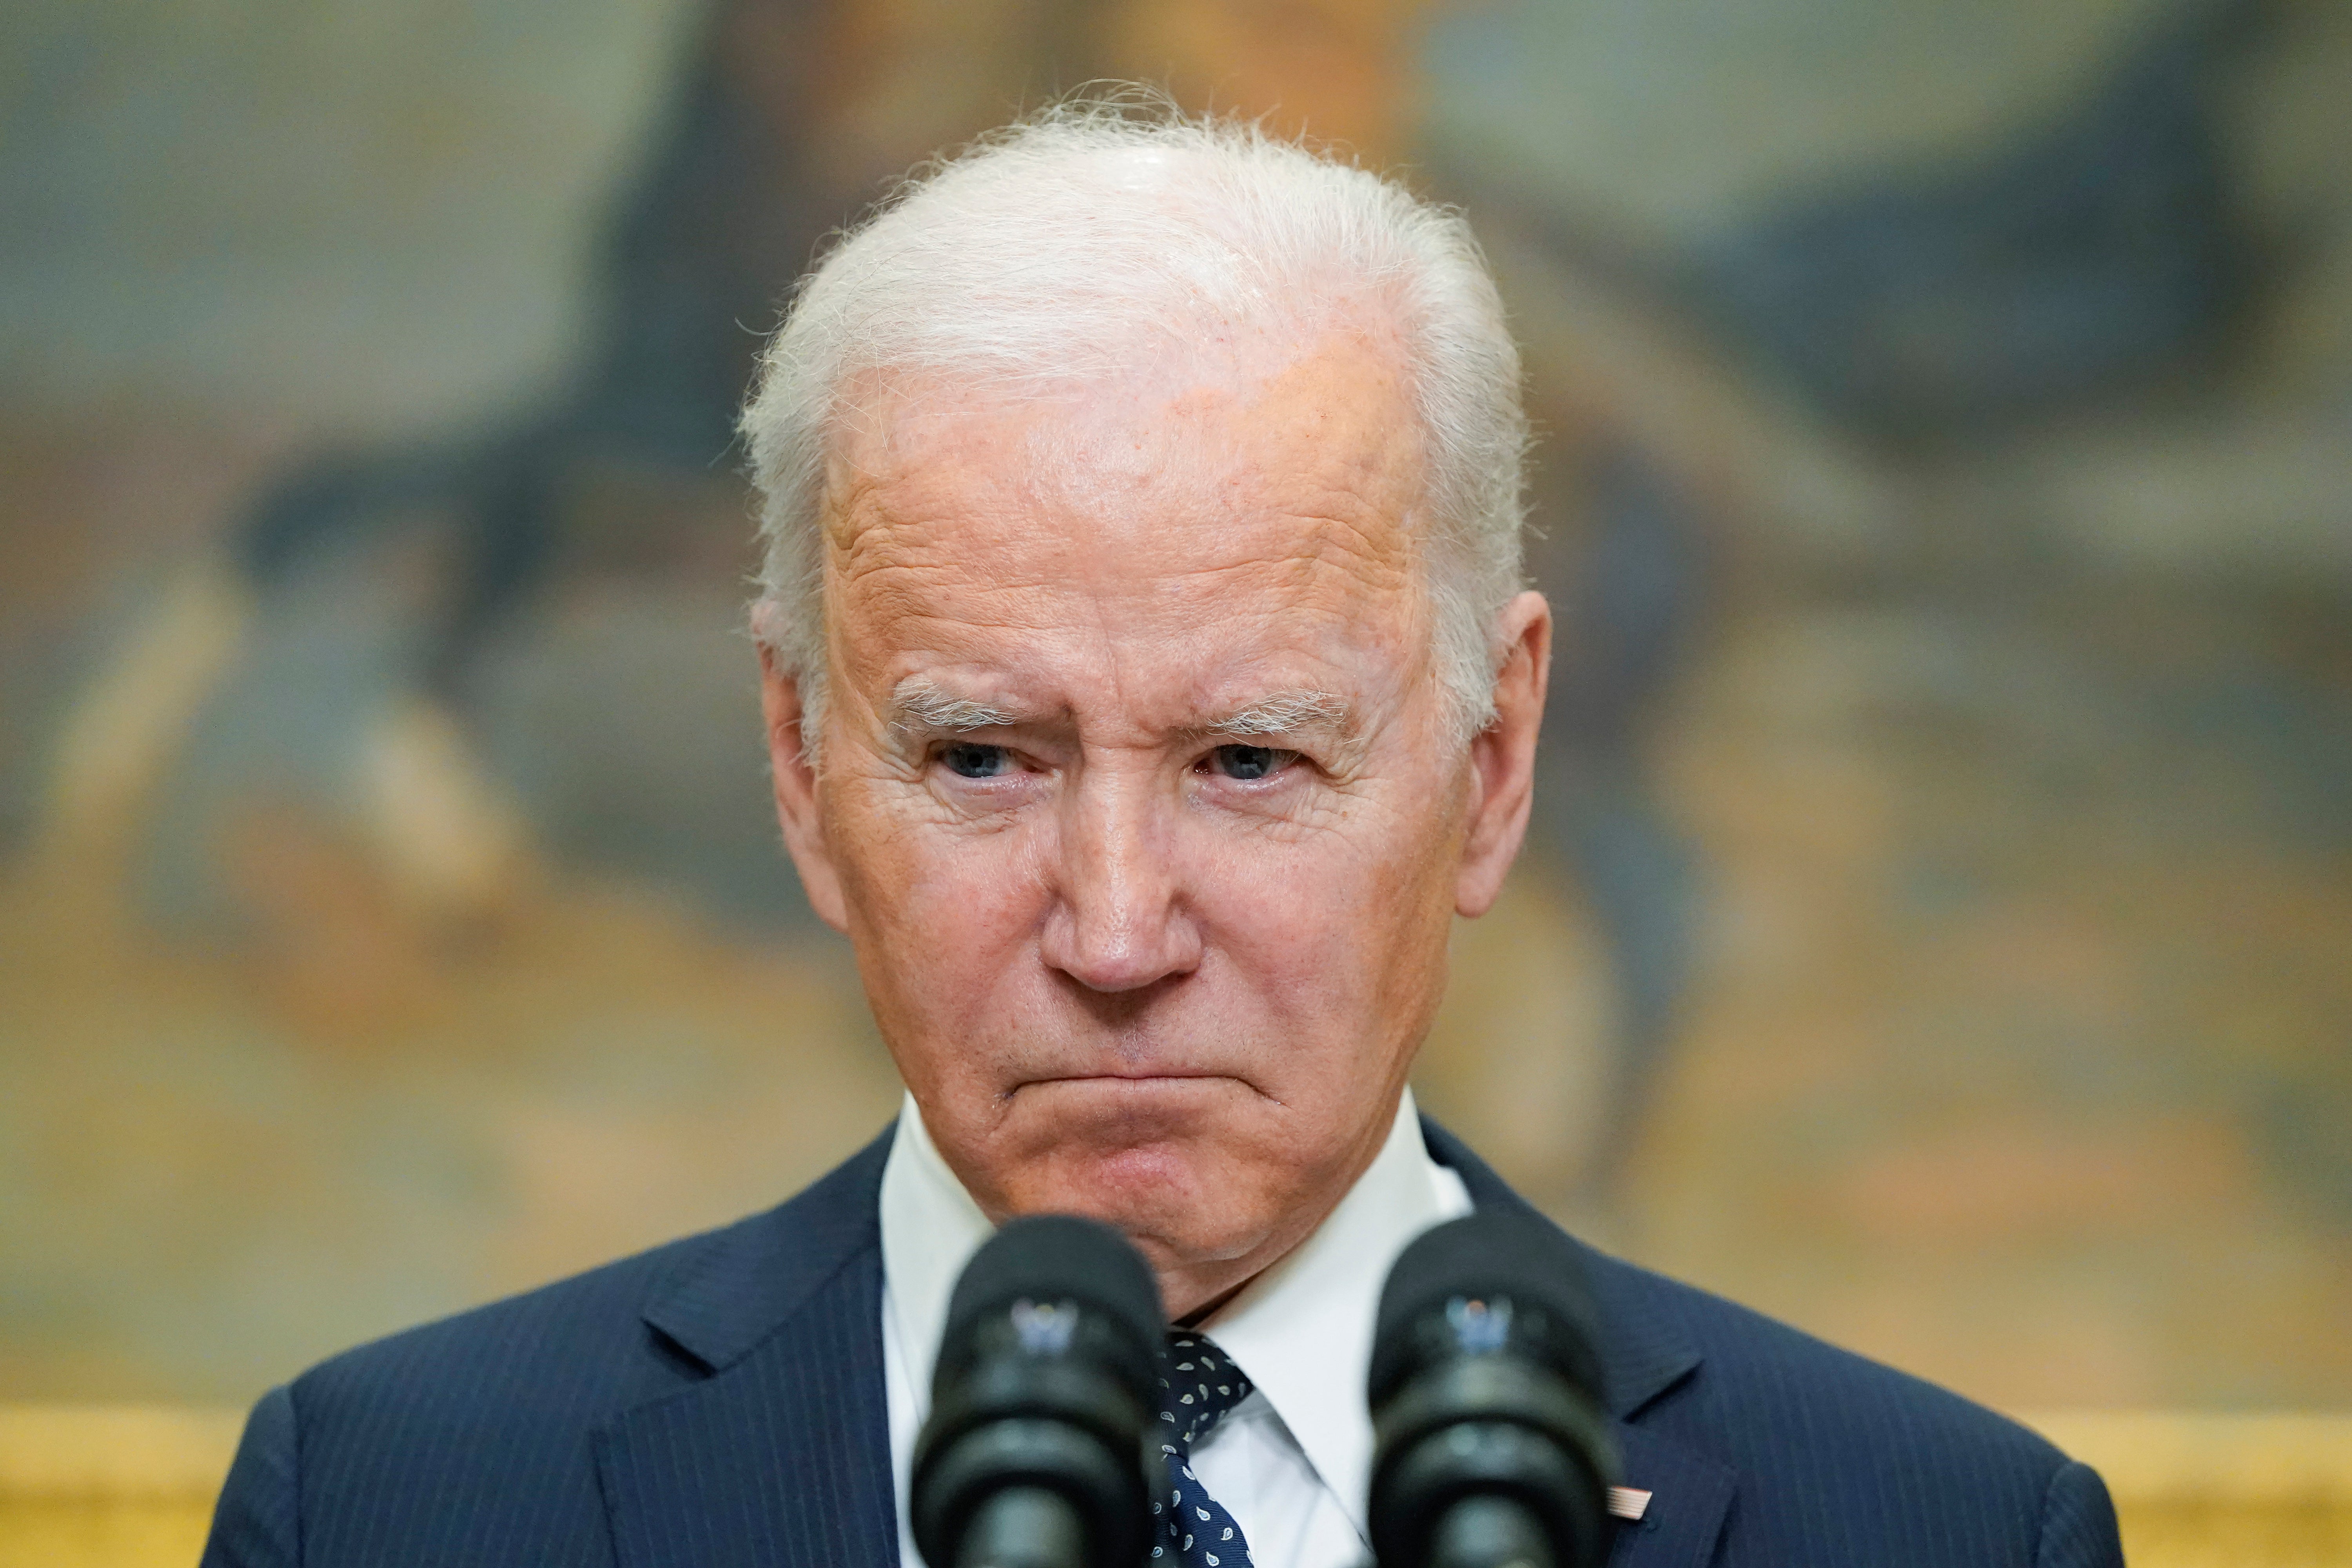 President Joe Biden listens to reporters questions as he speaks about Ukraine in the Roosevelt Room of the White House, Friday, Feb. 18, 2022, in Washington. (AP Photo/Alex Brandon)